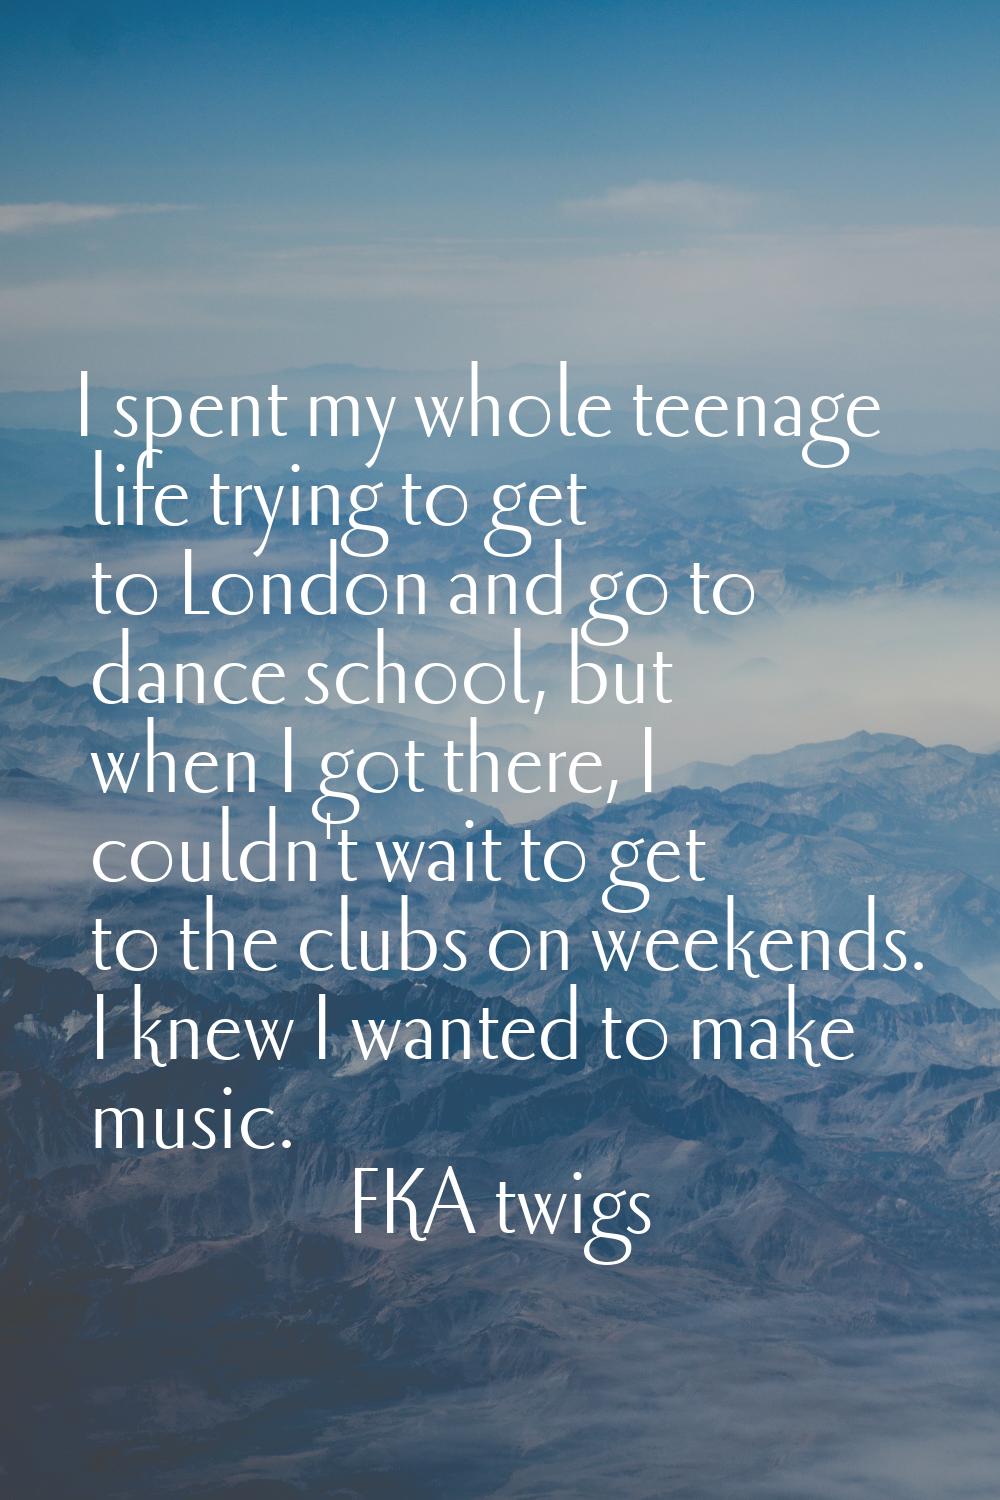 I spent my whole teenage life trying to get to London and go to dance school, but when I got there,